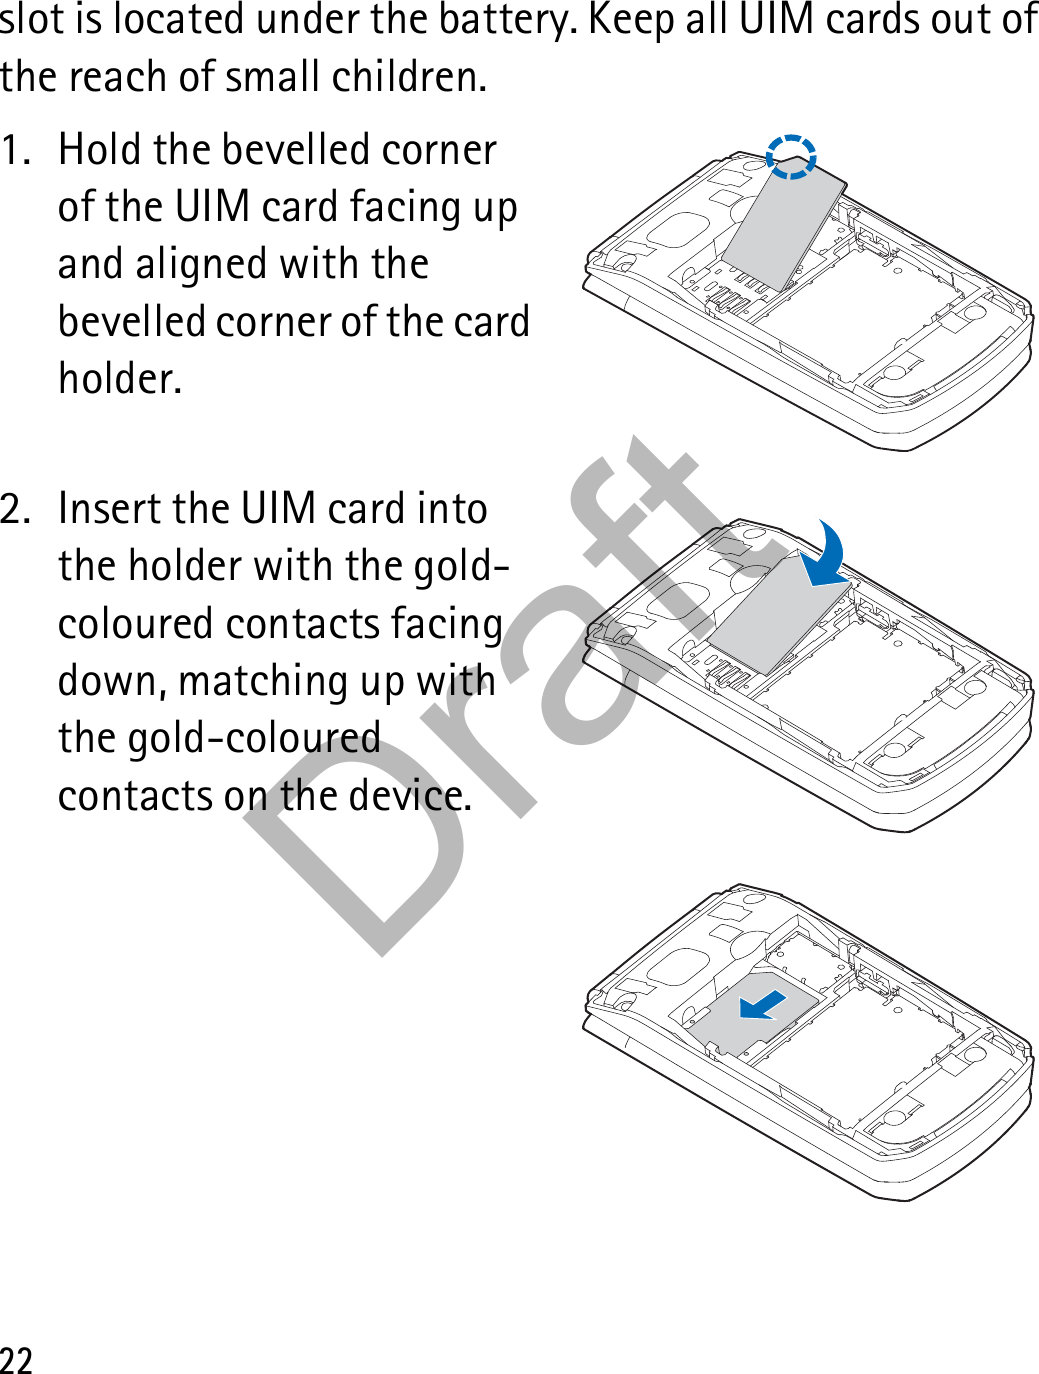 22slot is located under the battery. Keep all UIM cards out of the reach of small children.1. Hold the bevelled corner of the UIM card facing up and aligned with the bevelled corner of the card holder.2. Insert the UIM card into the holder with the gold-coloured contacts facing down, matching up with the gold-coloured contacts on the device.Draft